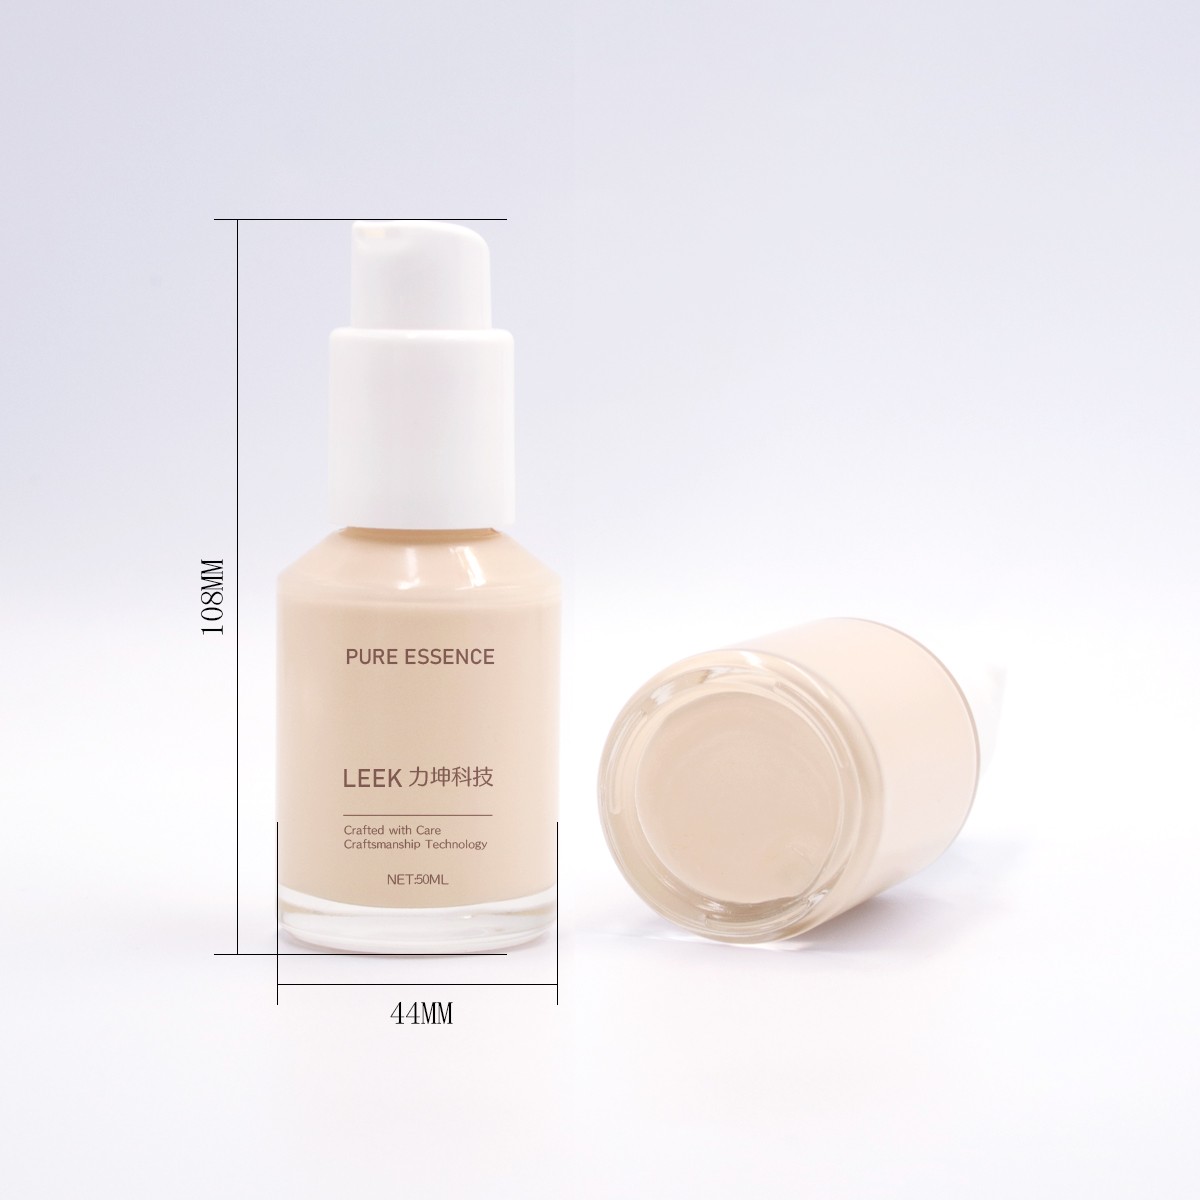 50ml foundation glass bottle with ABS pump